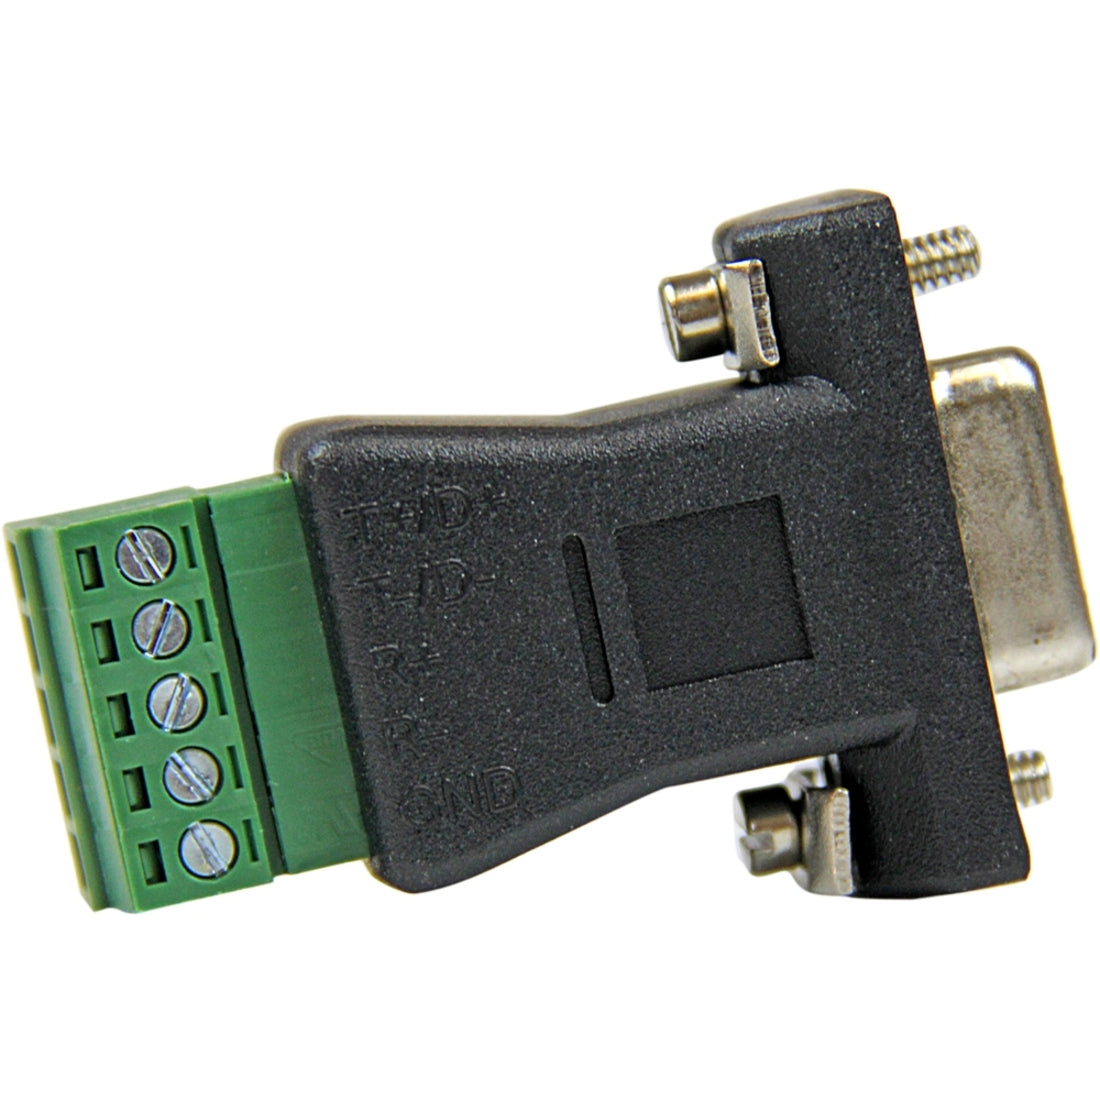 StarTech.com DB92422 RS422 RS485 Serial DB-9 to Terminal Block Adapter, Data Transfer Adapter